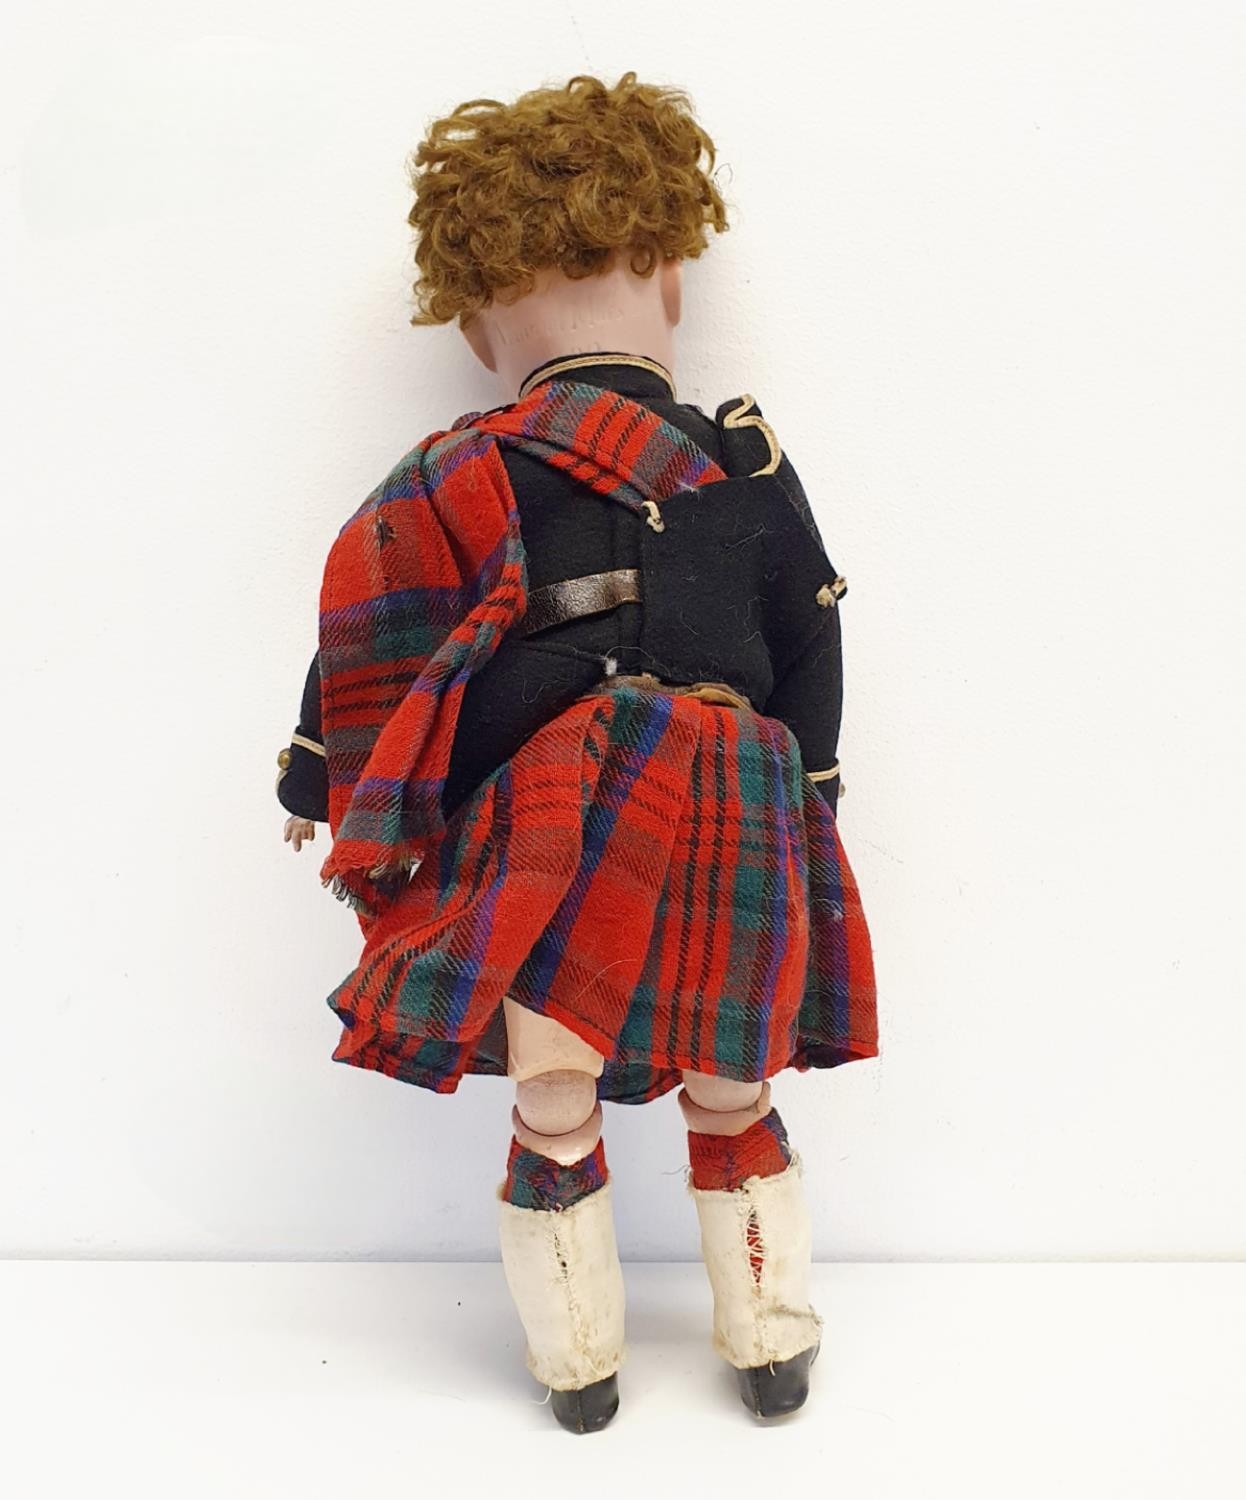 An Armand Marseille German bisque headed Scottish Boy doll, No 390, with a jointed composite body, - Image 3 of 7